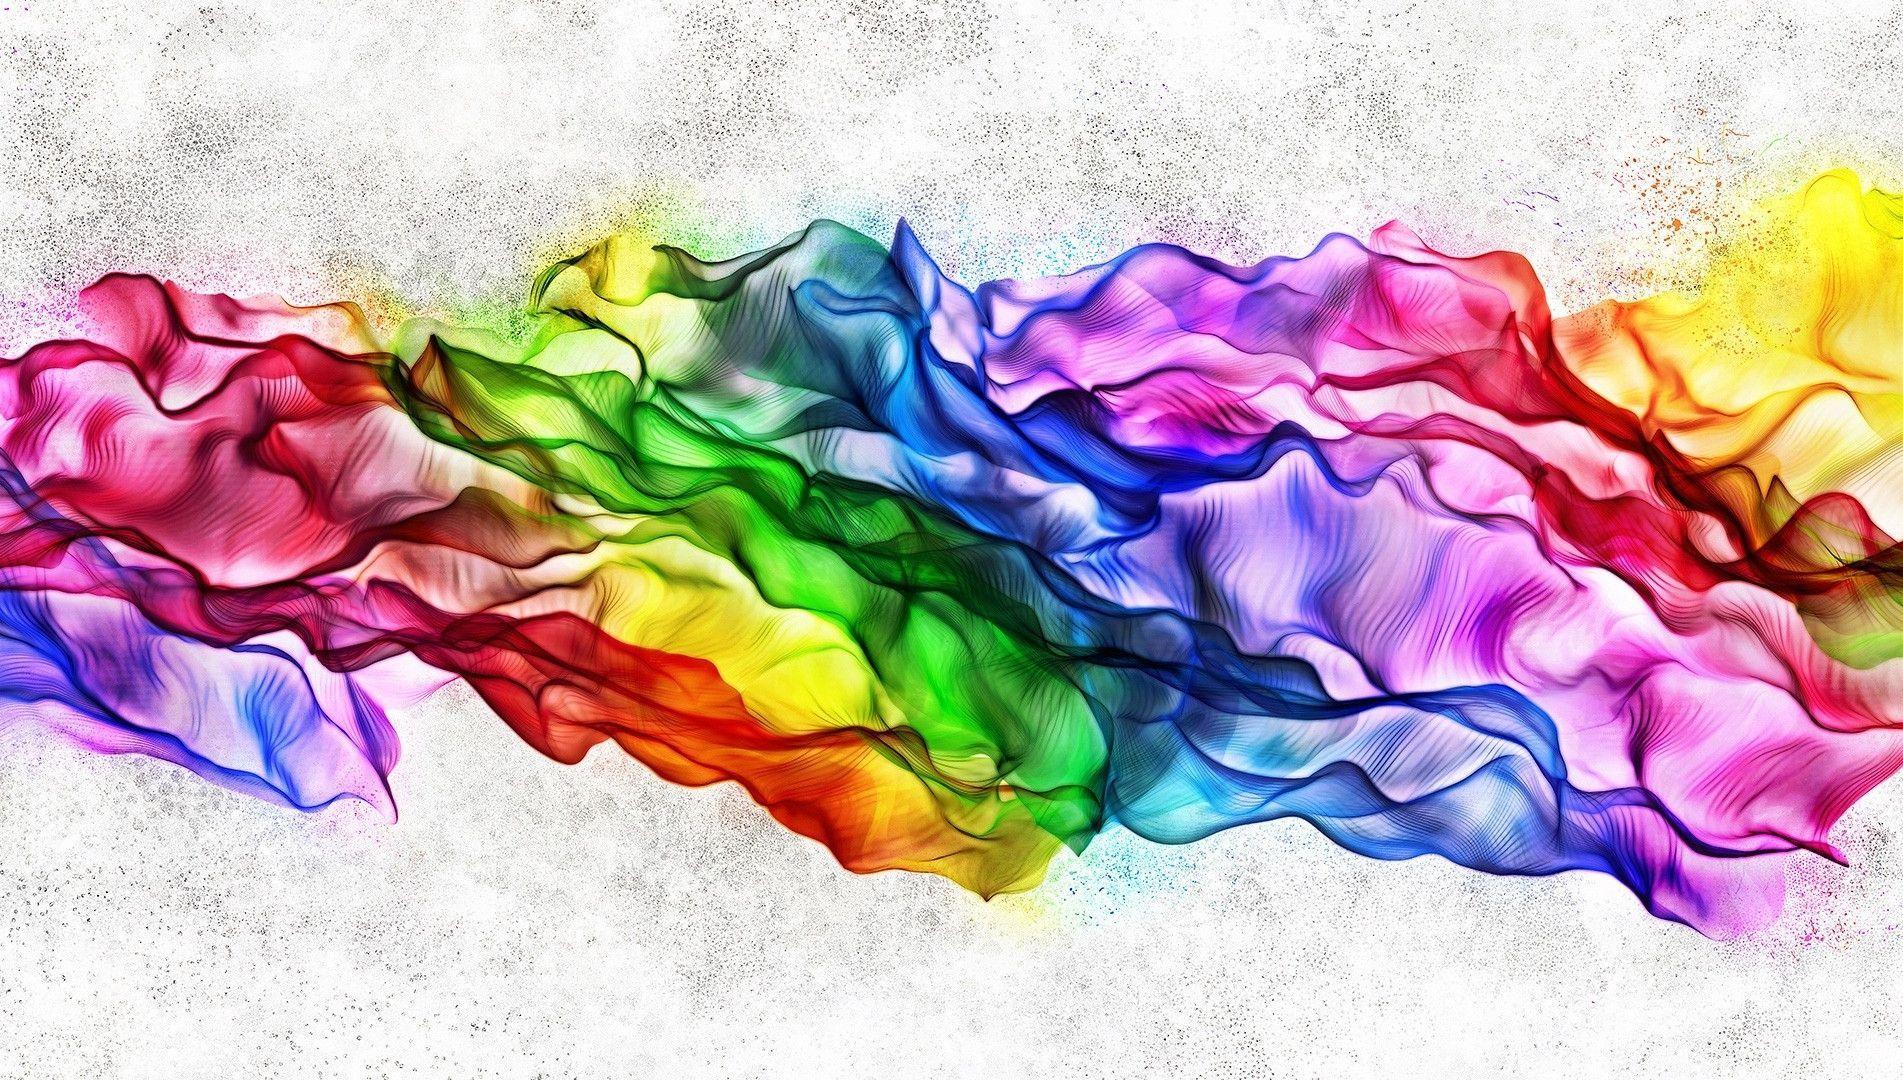 Abstract Silk in Rainbow Colors Wallpaper and